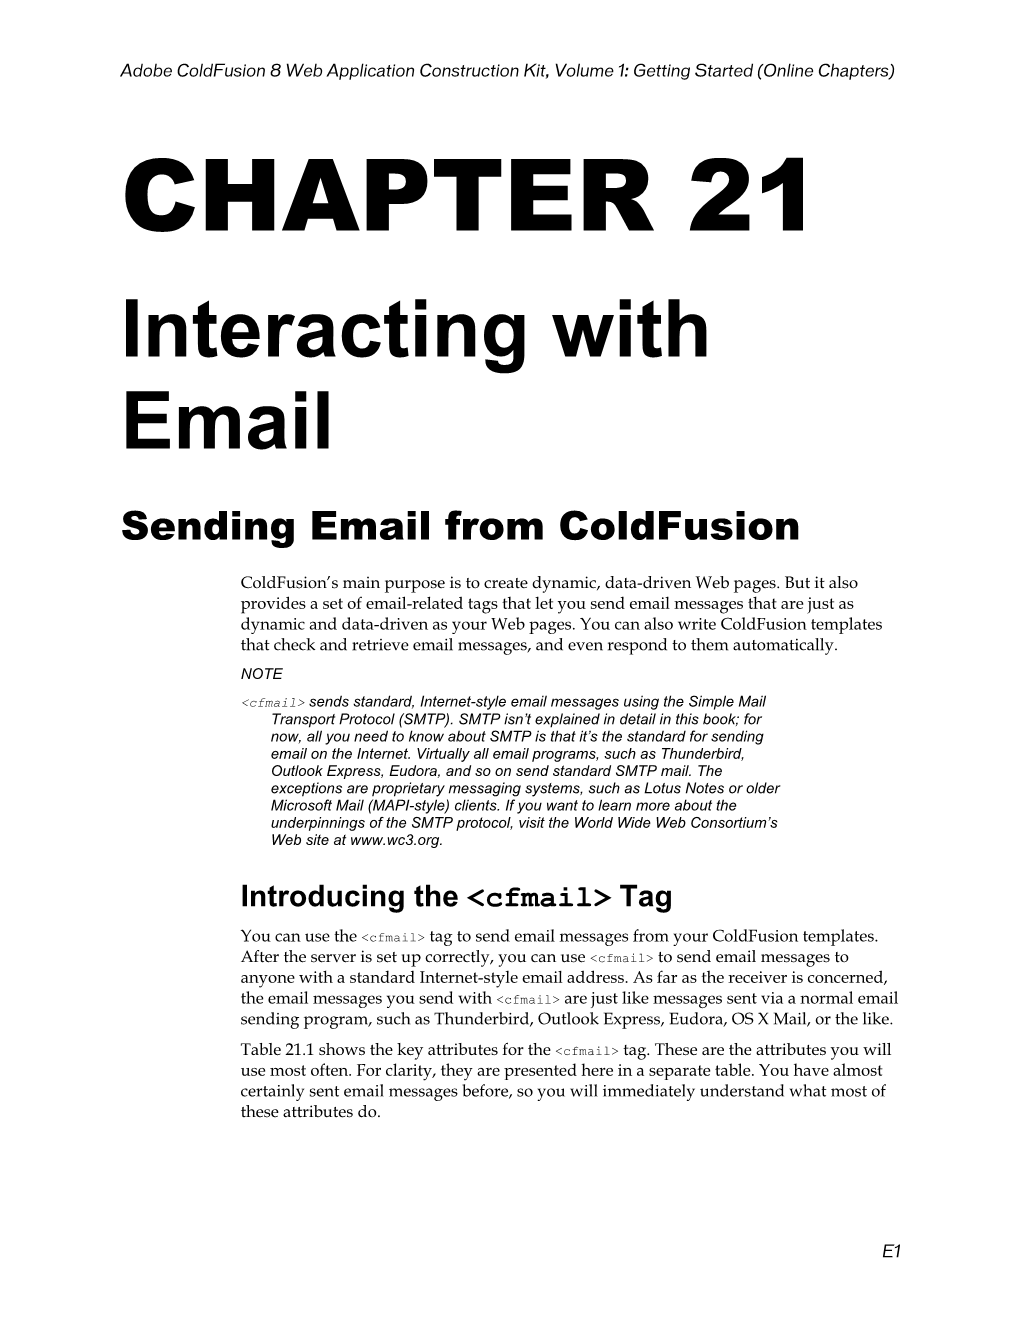 Sending Email from Coldfusion